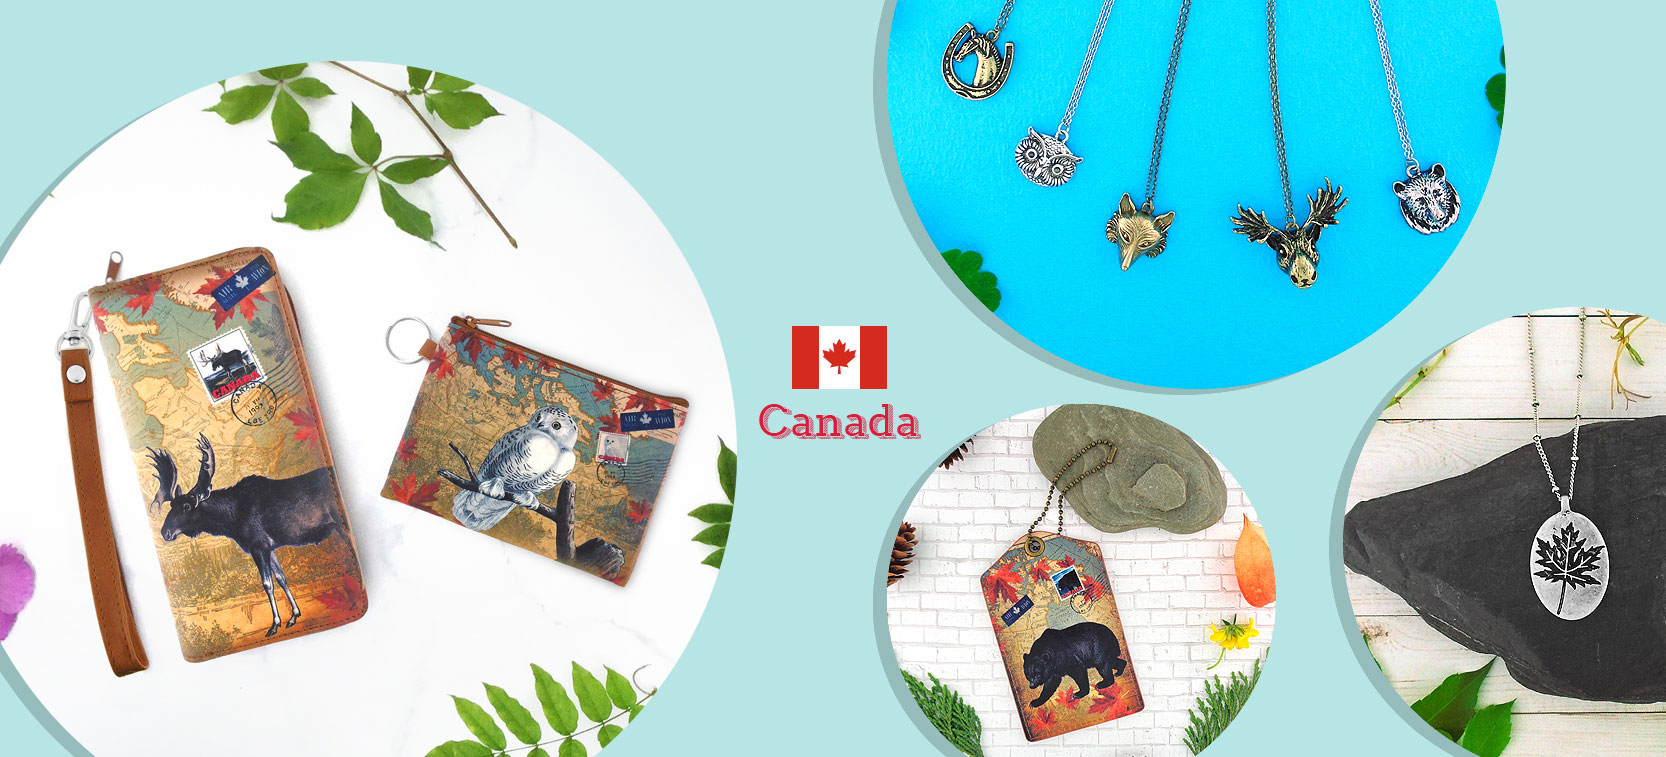 LAVISHY design and wholesale travel themed vegan accessories and gfits to gift shops, boutiques and garden centers, souvenir stores in Canada, USA and worldwide.